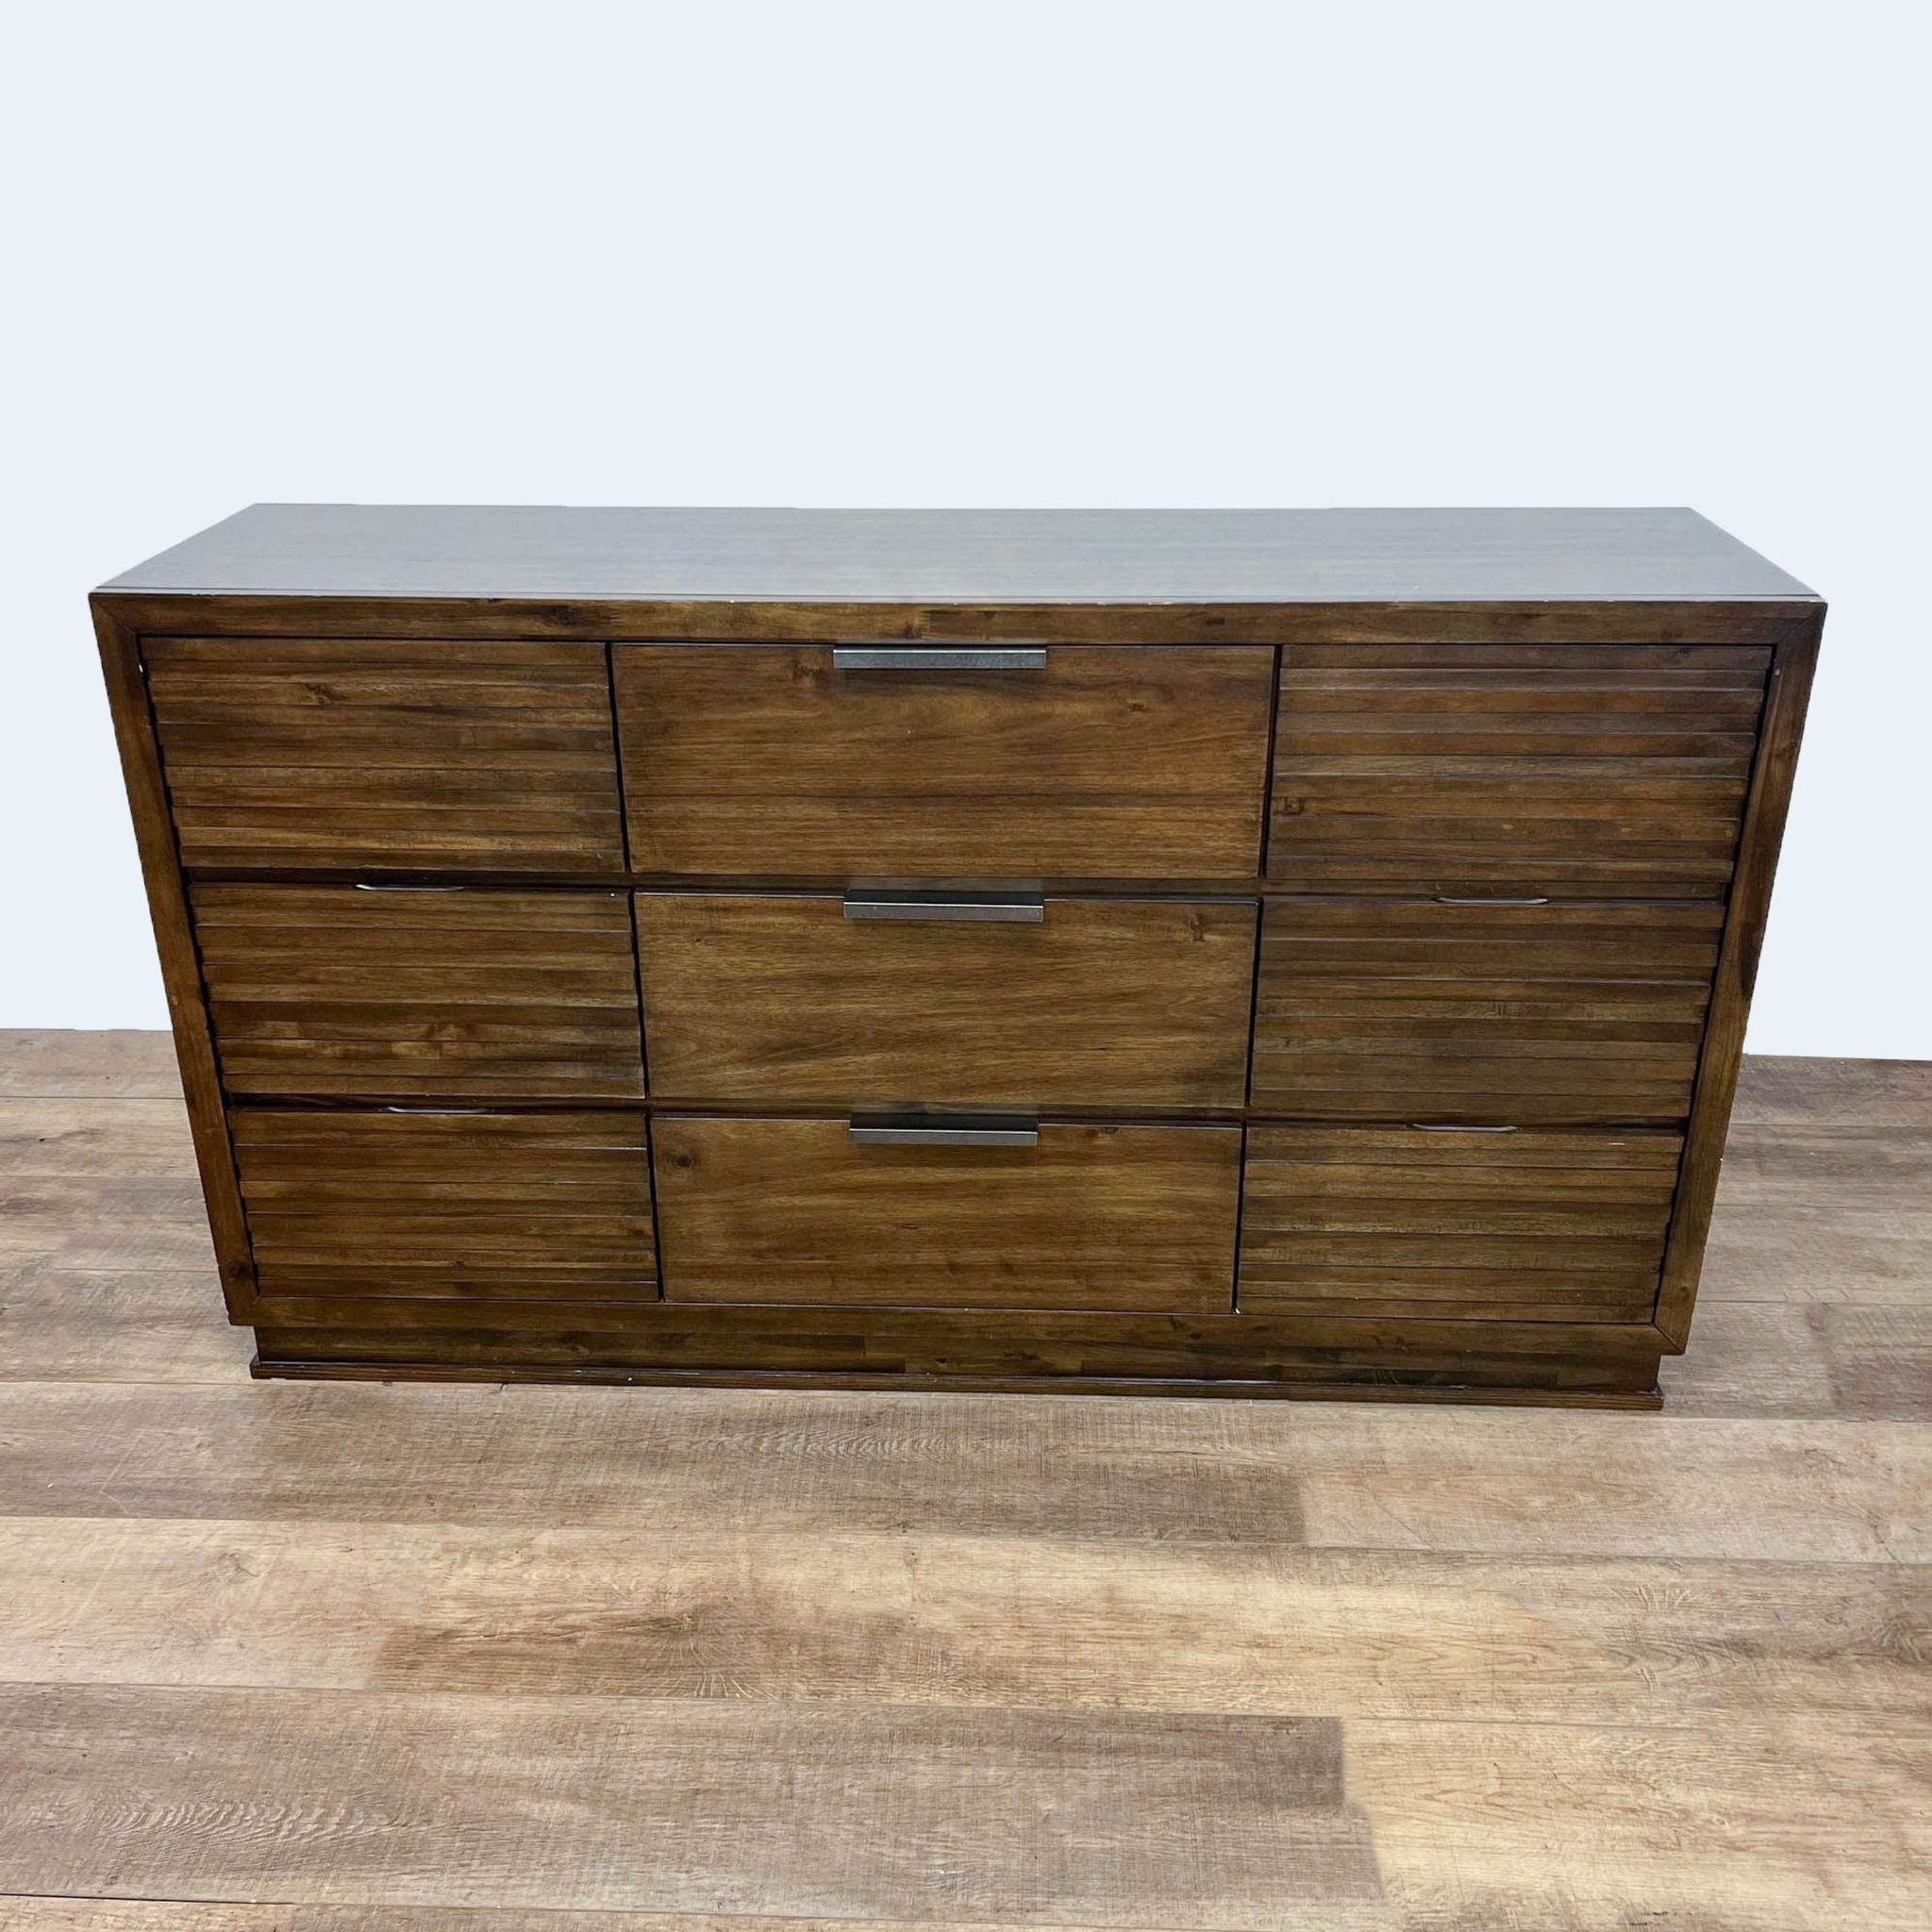 Walnut finish 6-drawer dresser by Furniture of America with wood grain details and metal pull handles.